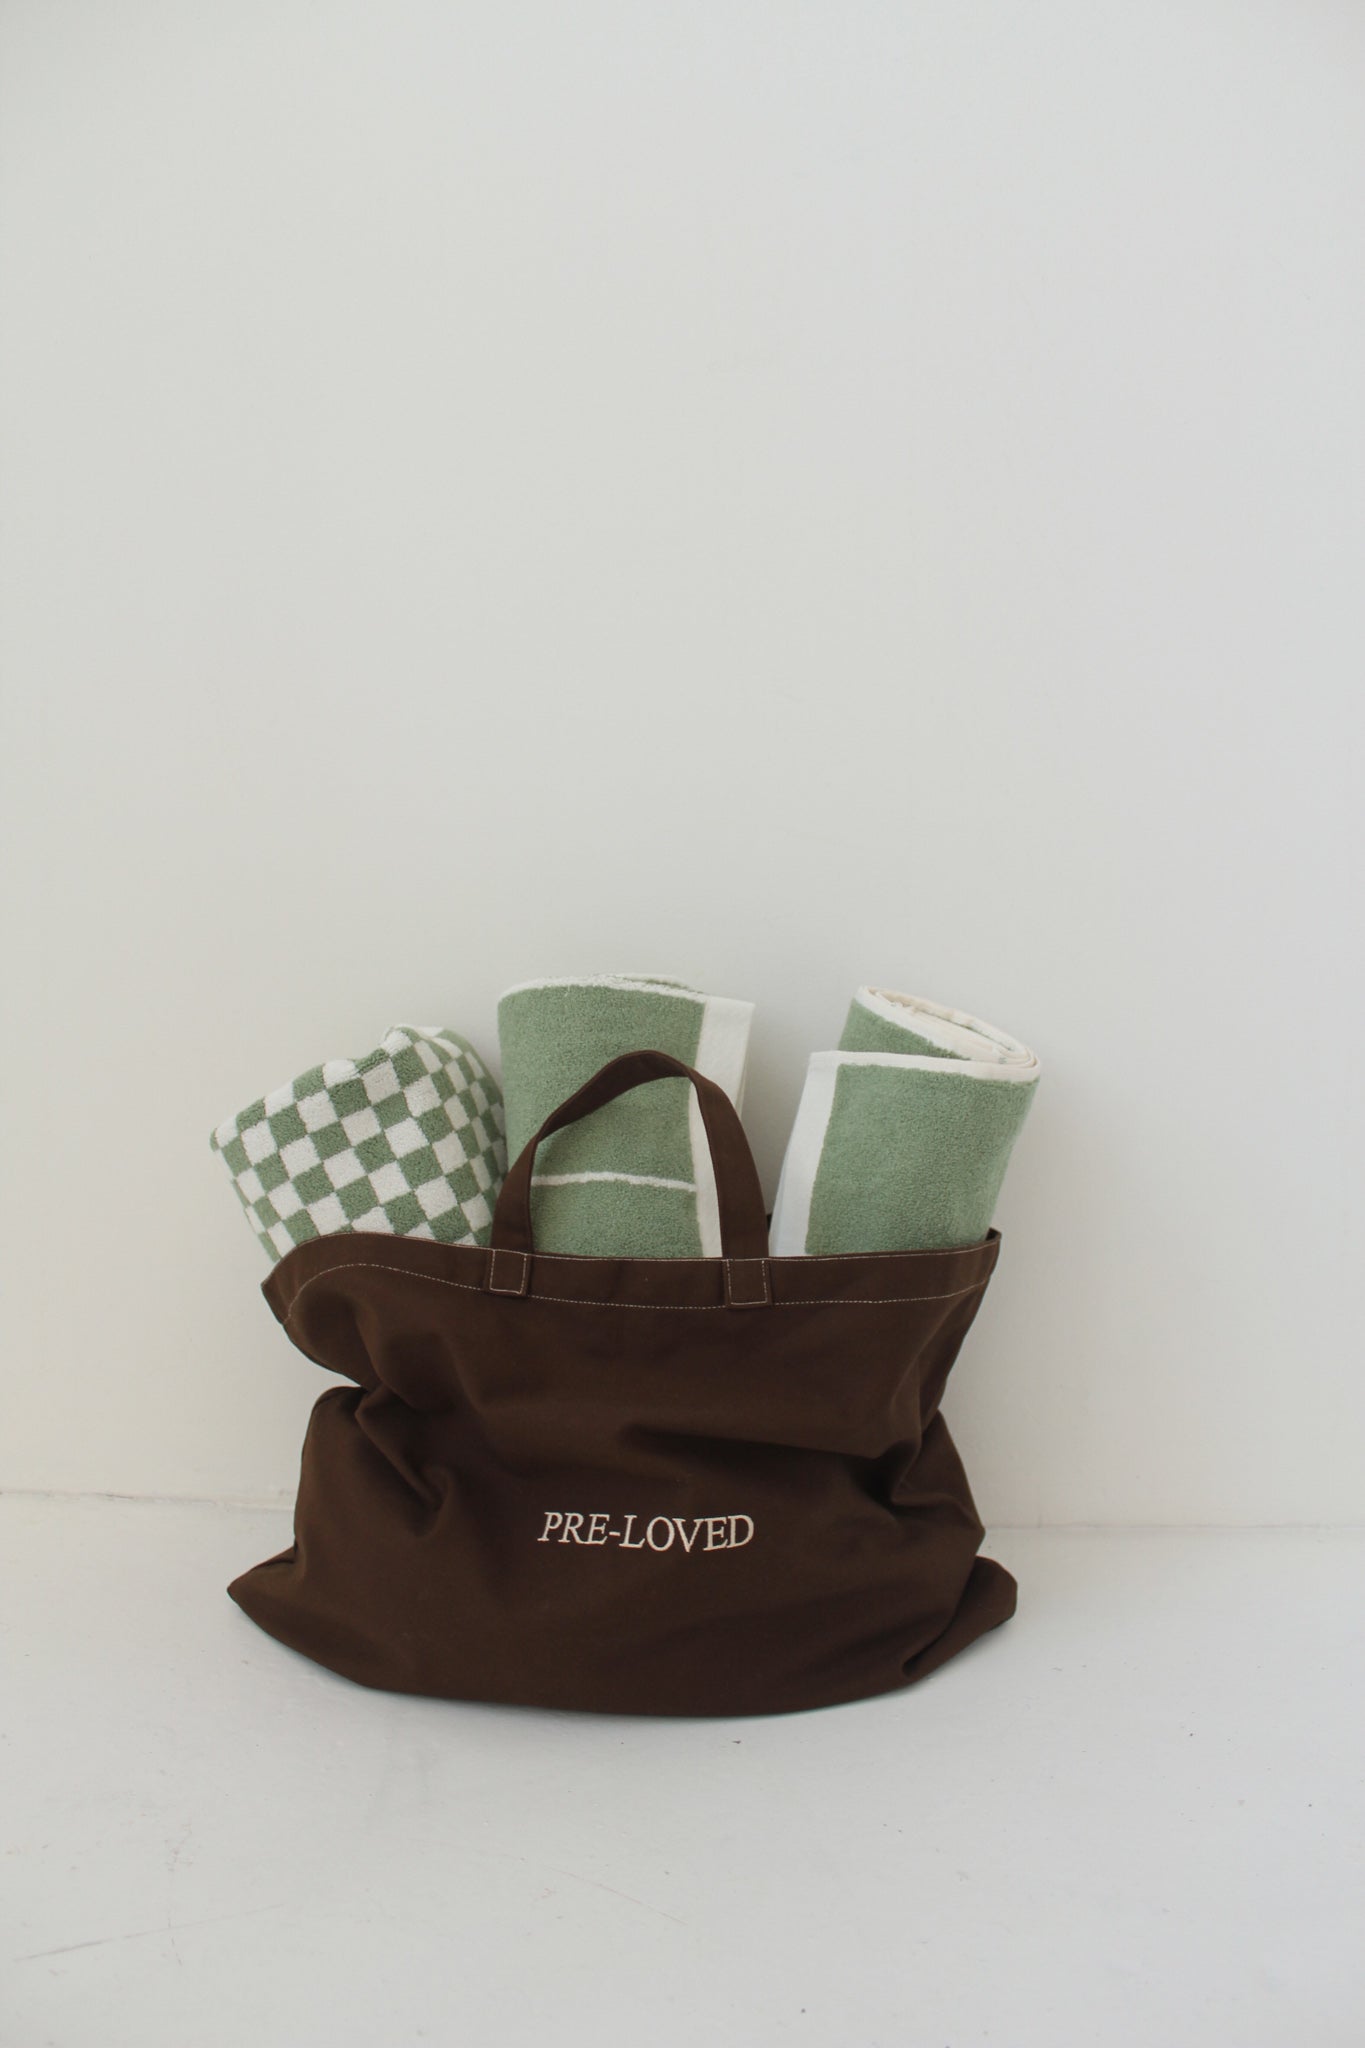 Centerpiece Carry-All Tote